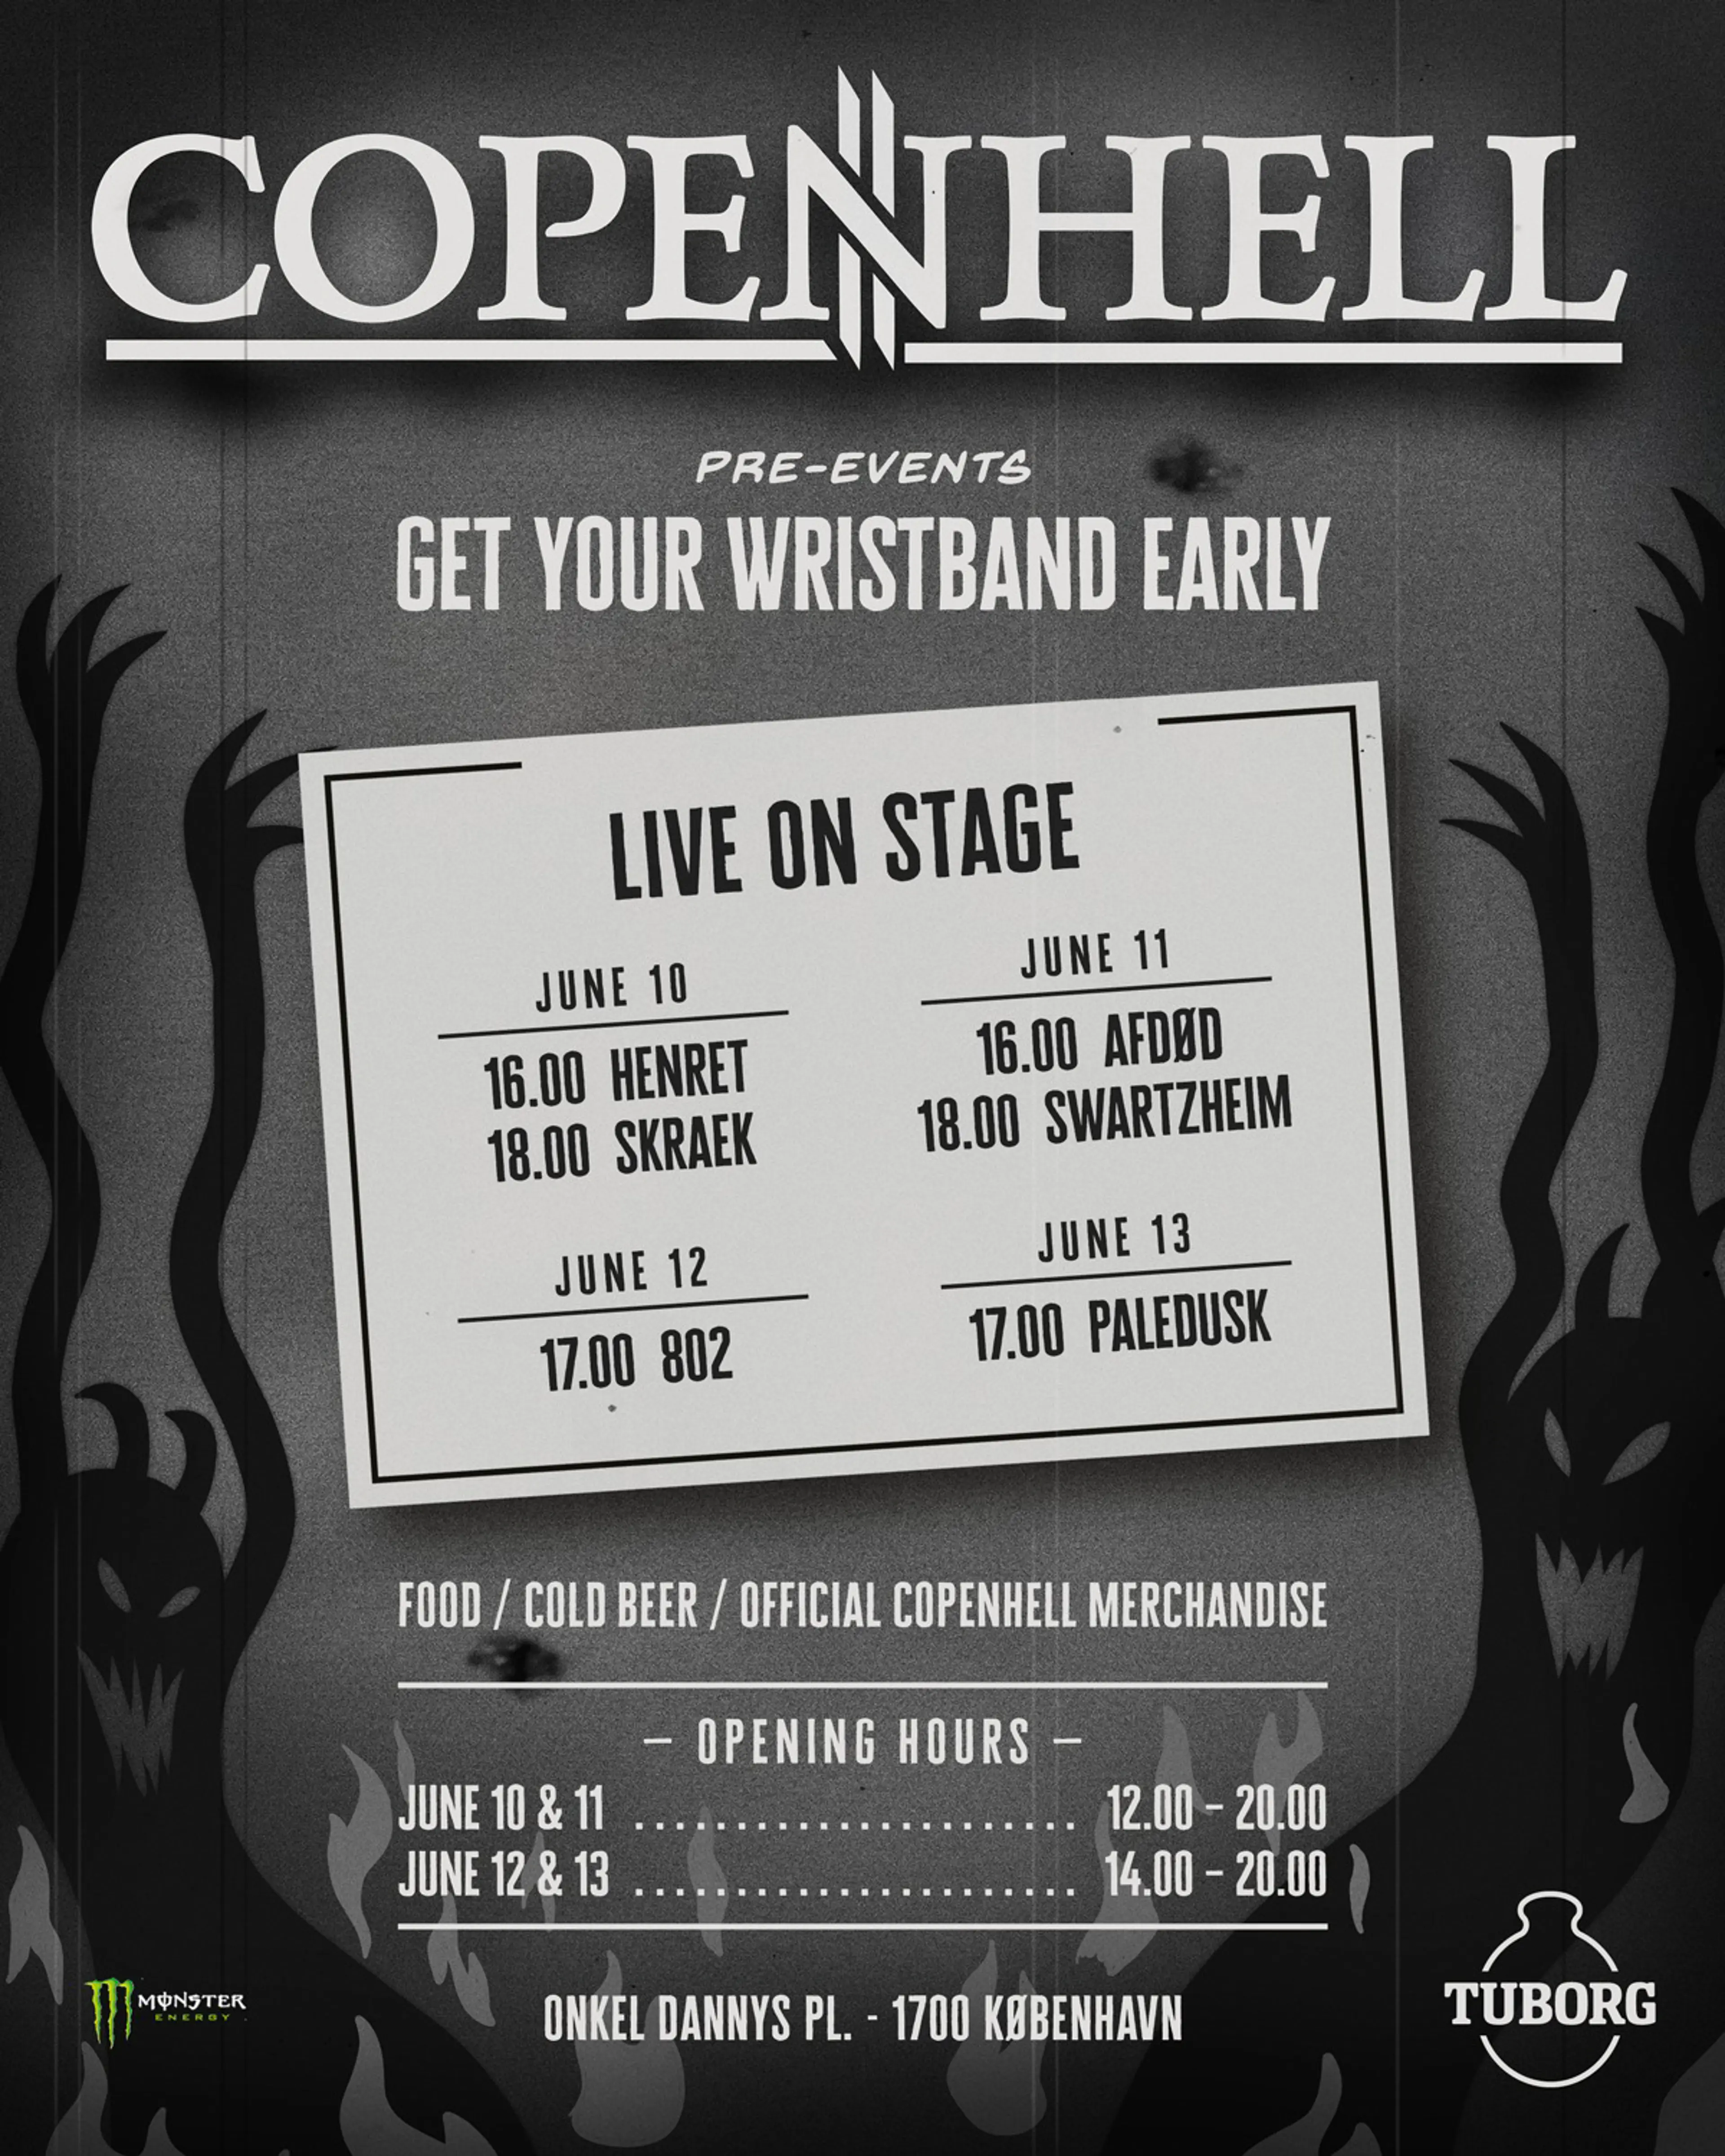 COME AND GET YOUR WRISTBAND BEFORE COPENHELL